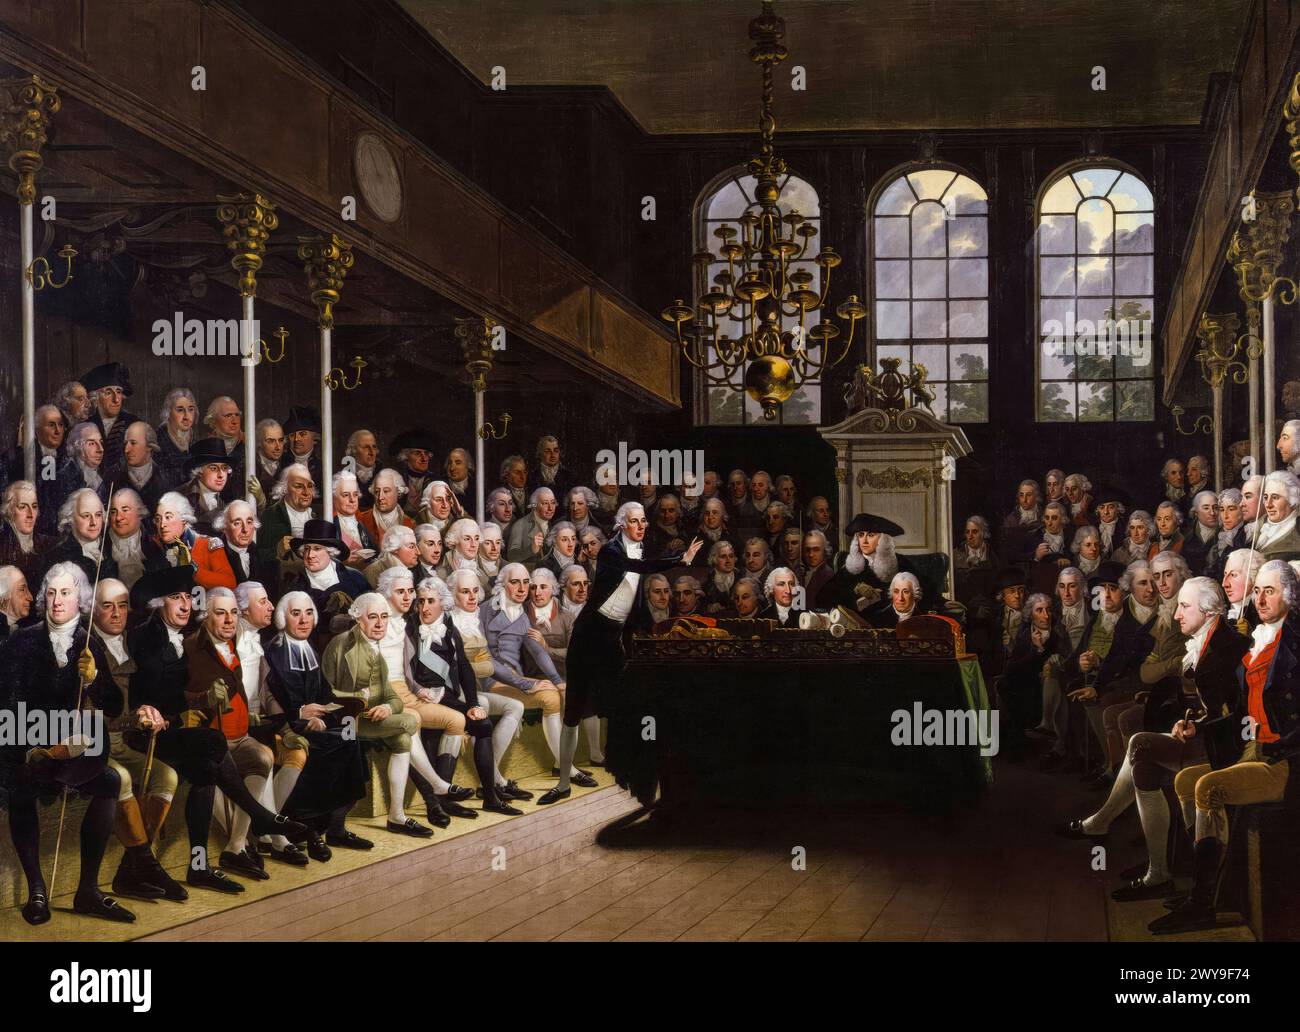 18th Century British Parliament: Interior of The House of Commons, 1793-1794, painting in oil on canvas by Anton Hickel, 1793-1795 Stock Photo